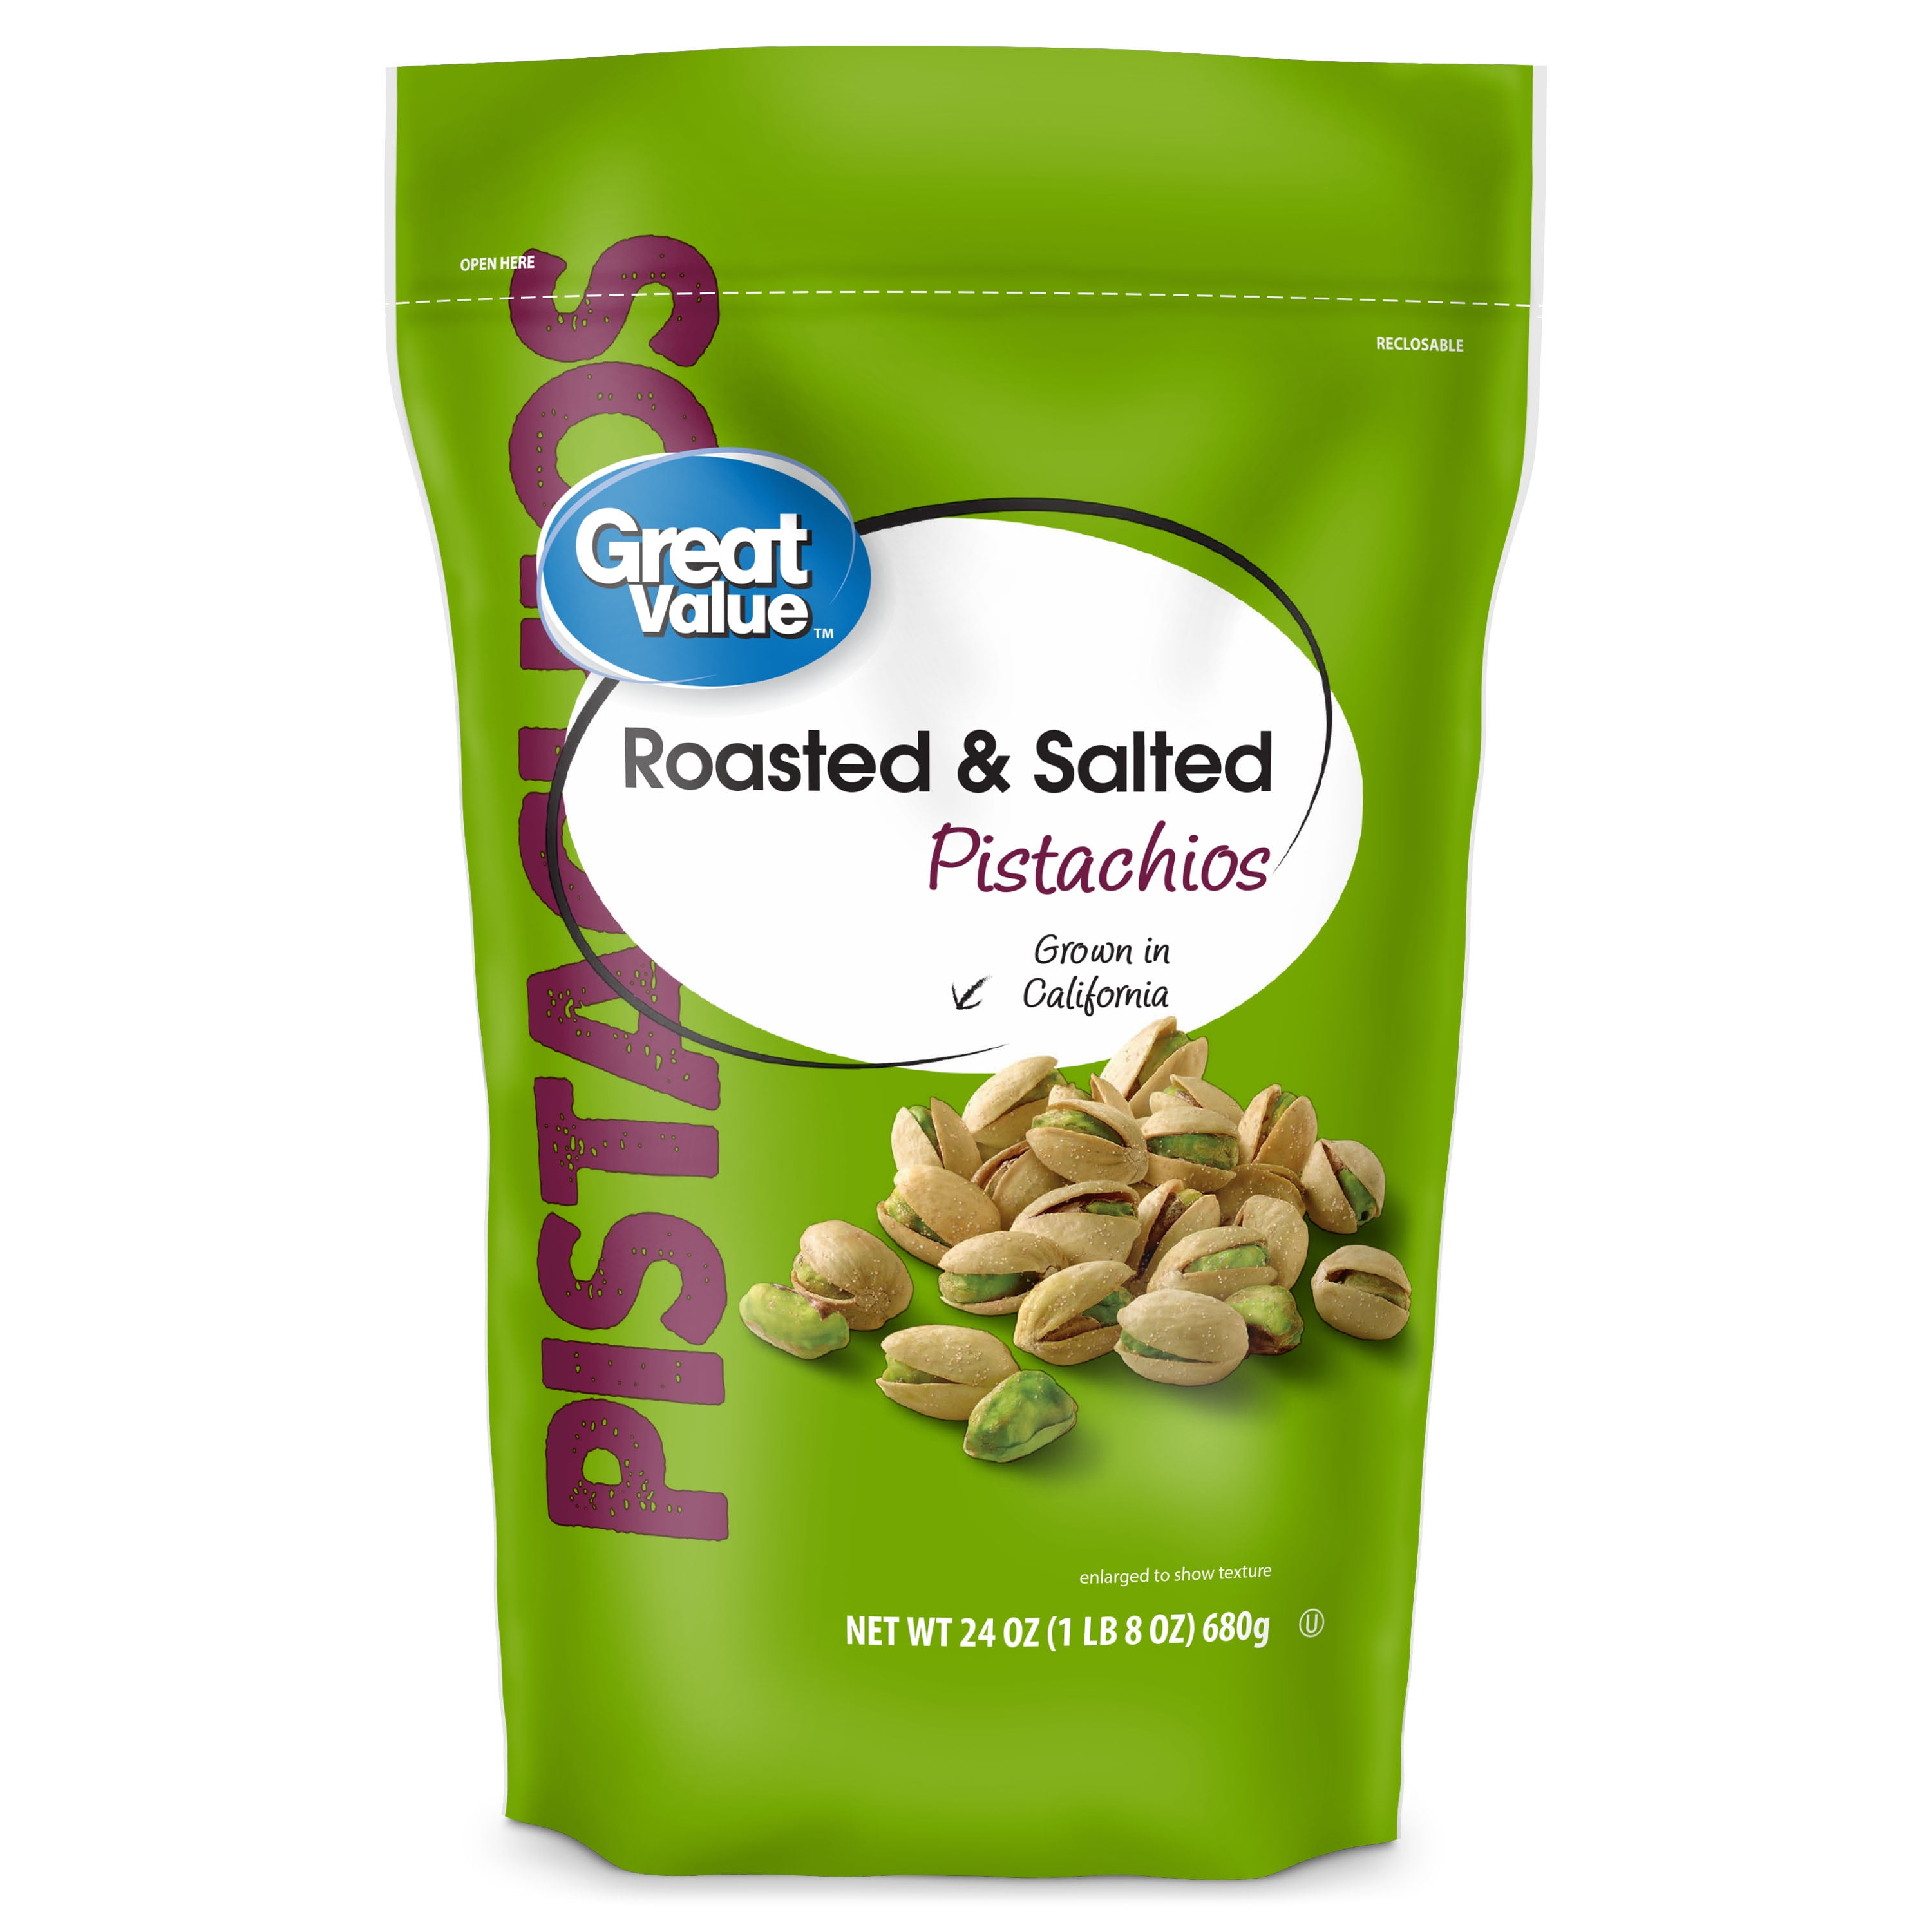 Great Value Roasted & Salted Pistachios, 24 oz